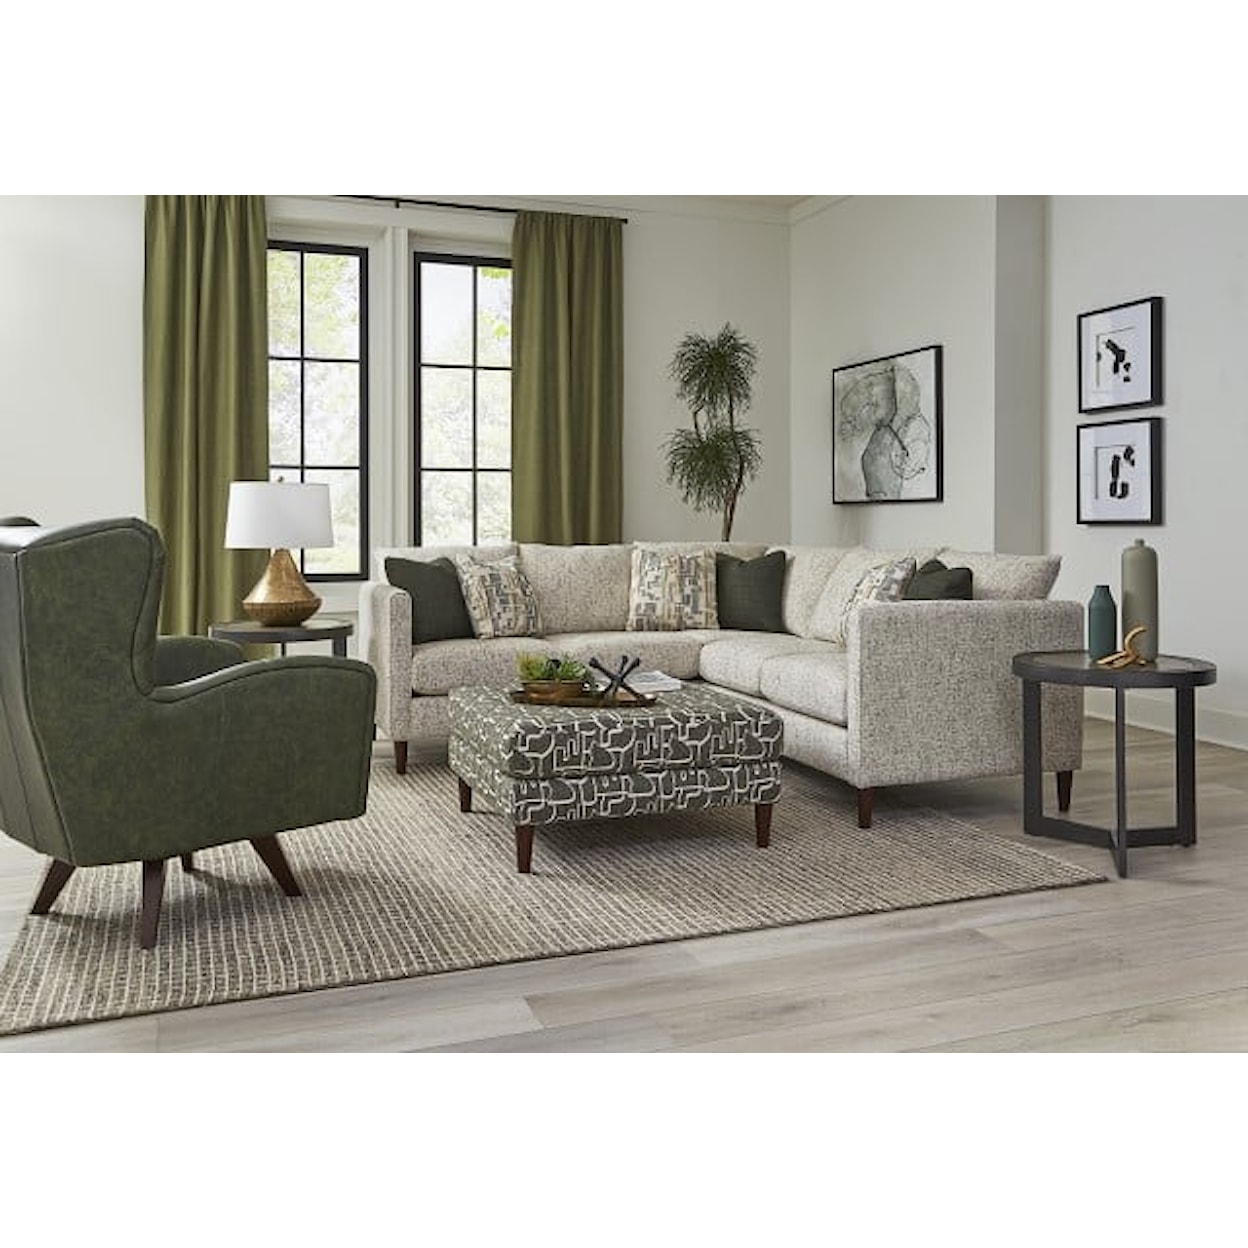 England 3K00 Series Sectional